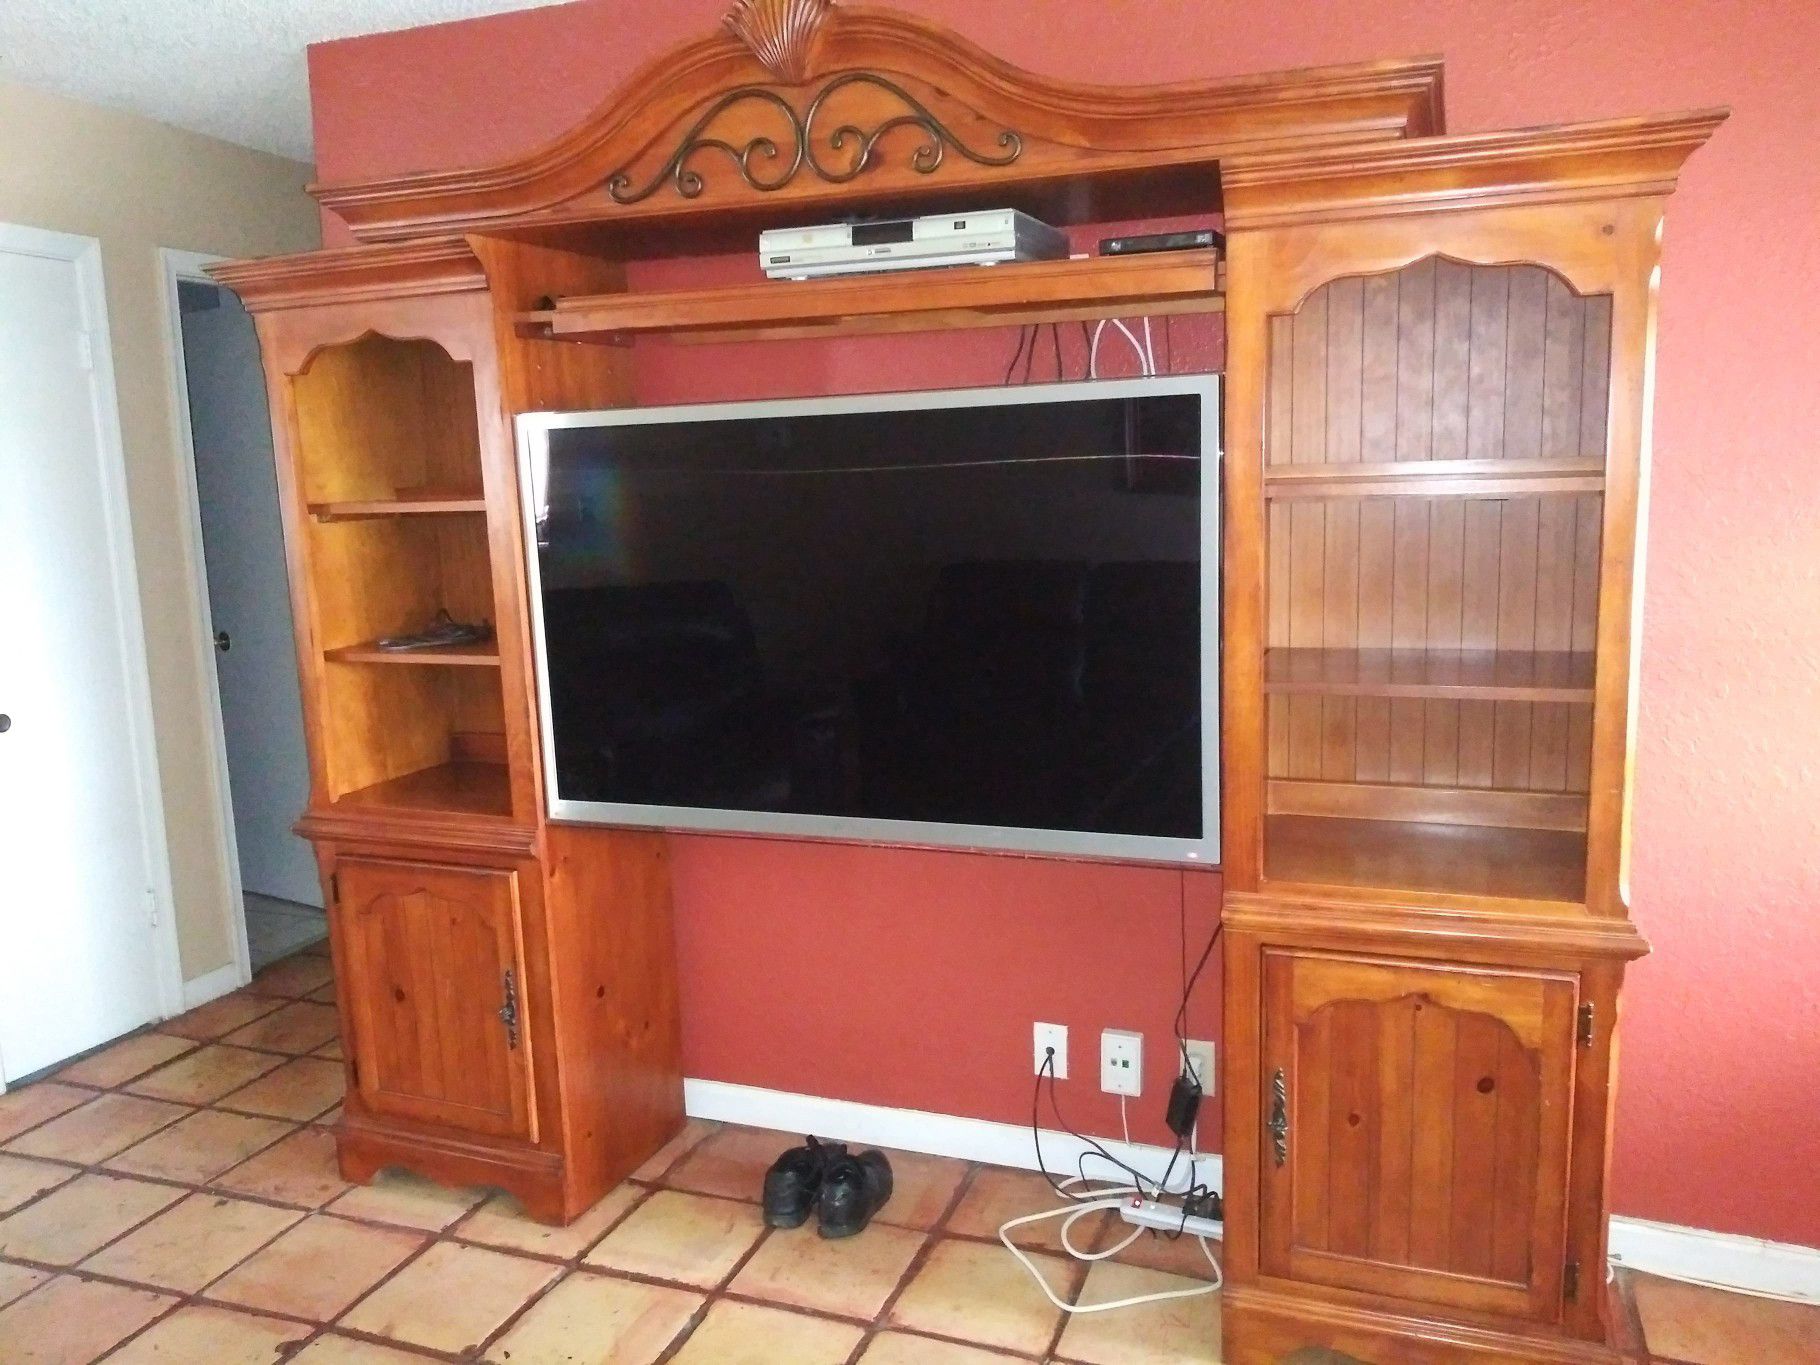 3pc wood wall unit and 55 inch tv 200 takes both . TV lights flick a little not bad but can be fixed.